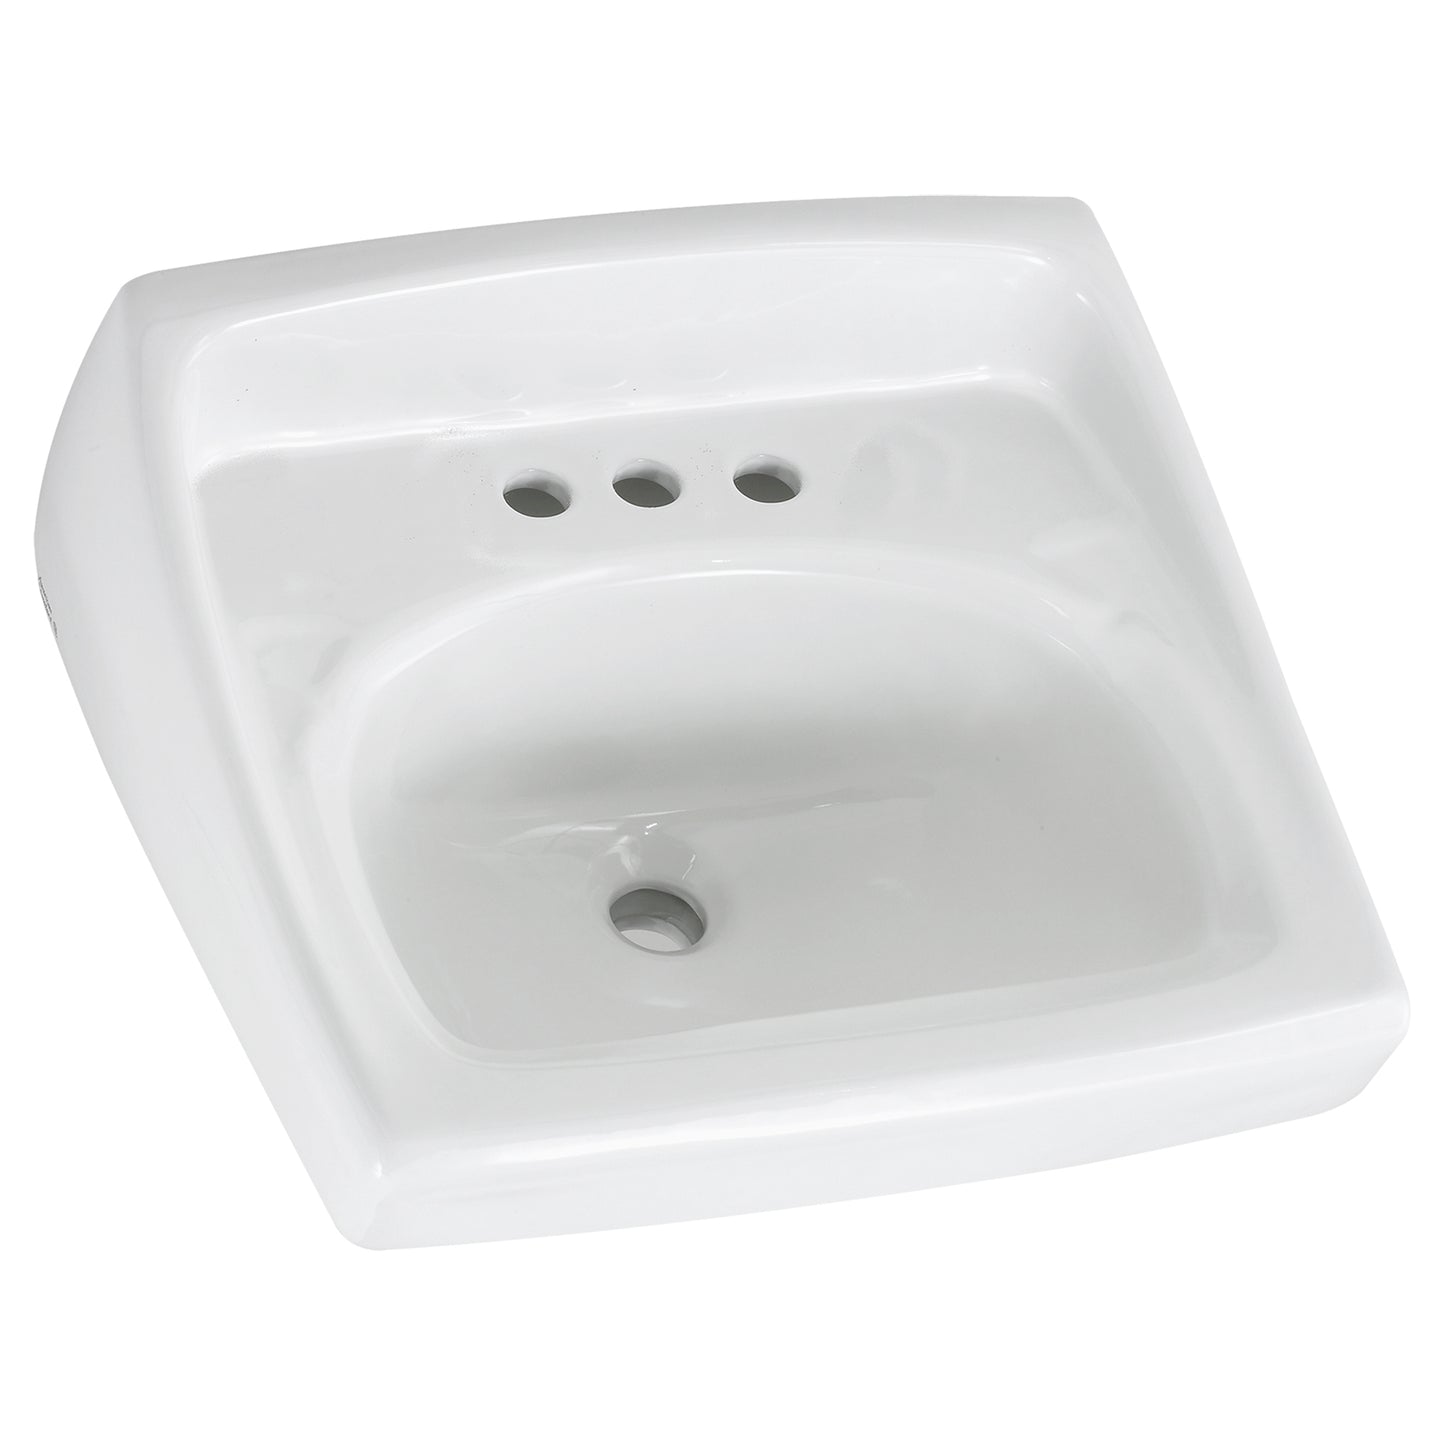 AMERICAN-STANDARD 0356015.020, Lucerne Wall-Hung Sink With 8-Inch Widespread in White